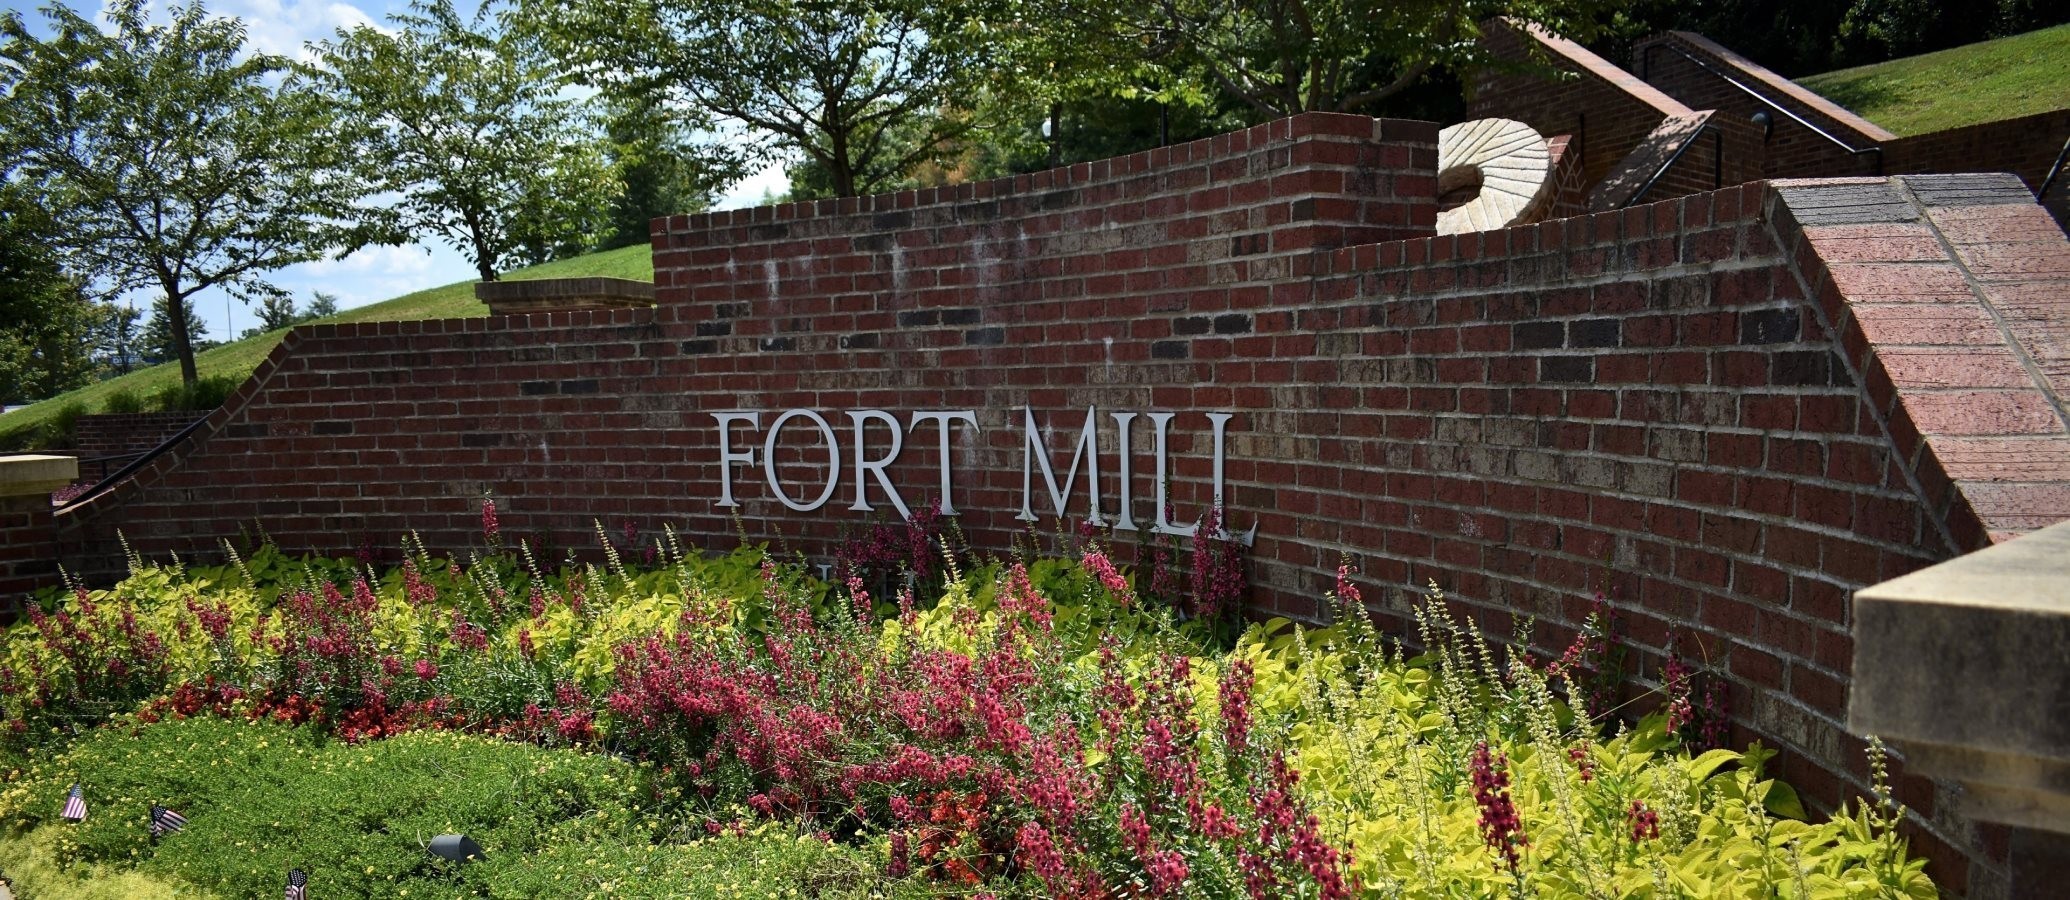 2. Fort Mill Parkway